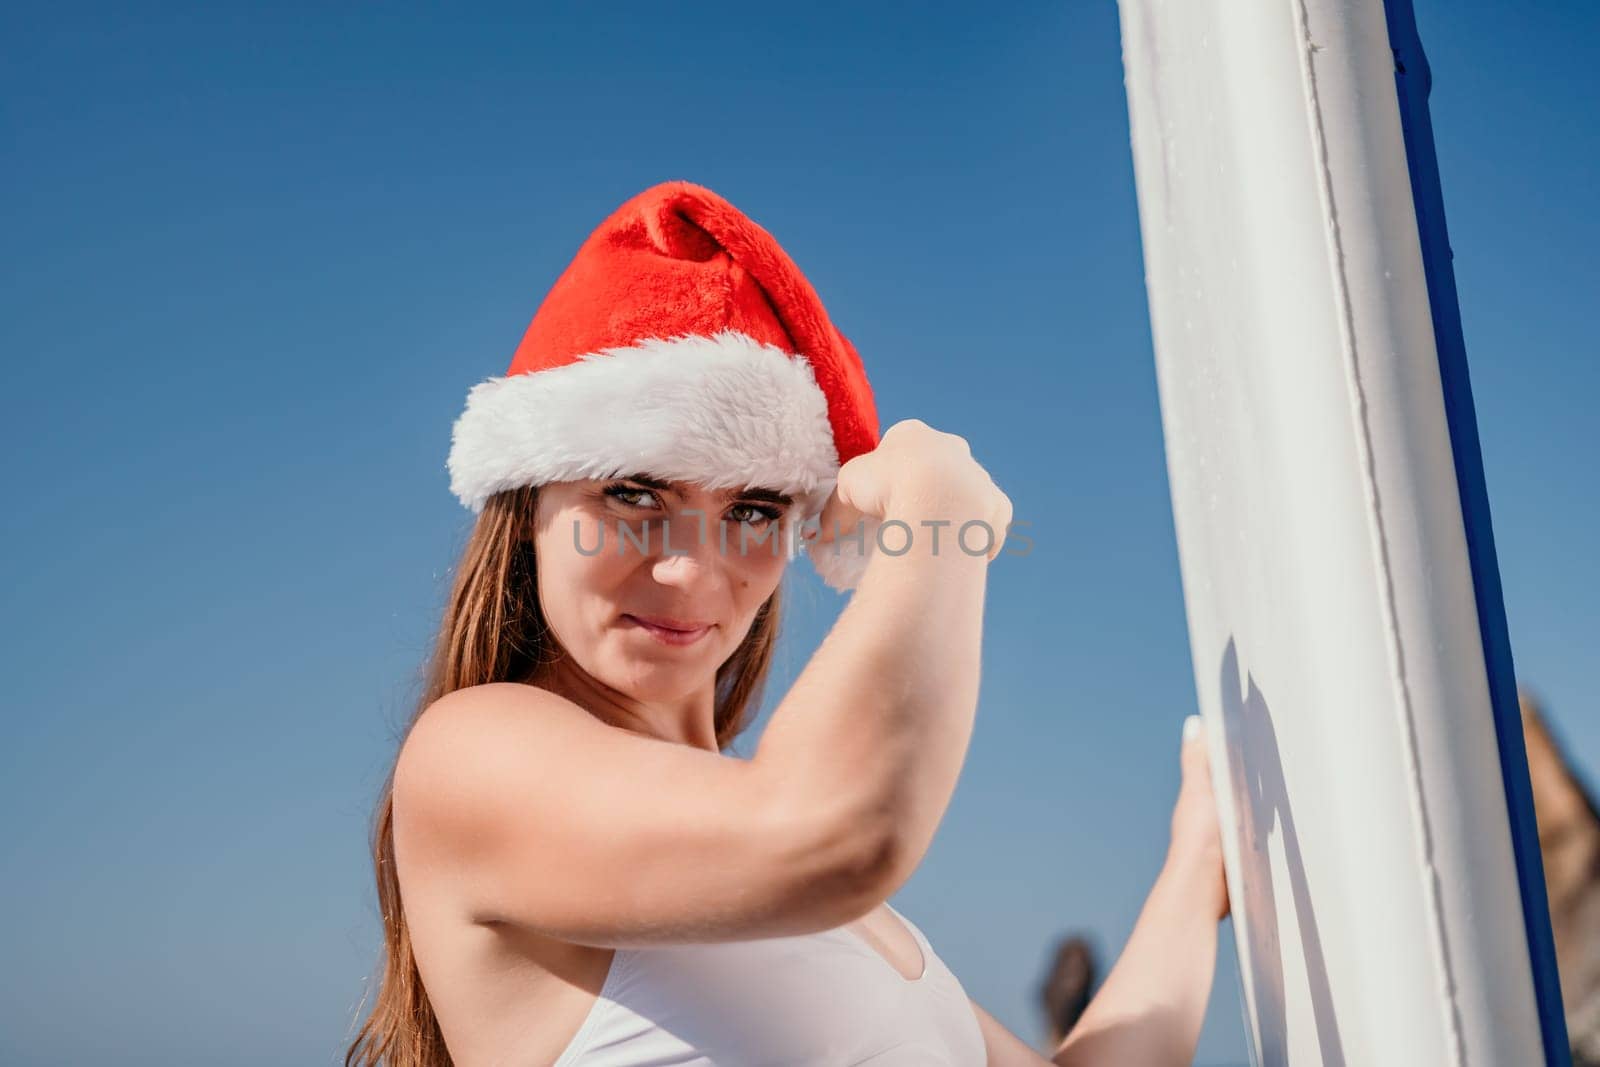 Woman sea sup. Close up portrait of happy young caucasian woman with long hair in Santa hat looking at camera and smiling. Cute woman portrait in a white bikini posing on sup board in the sea by panophotograph